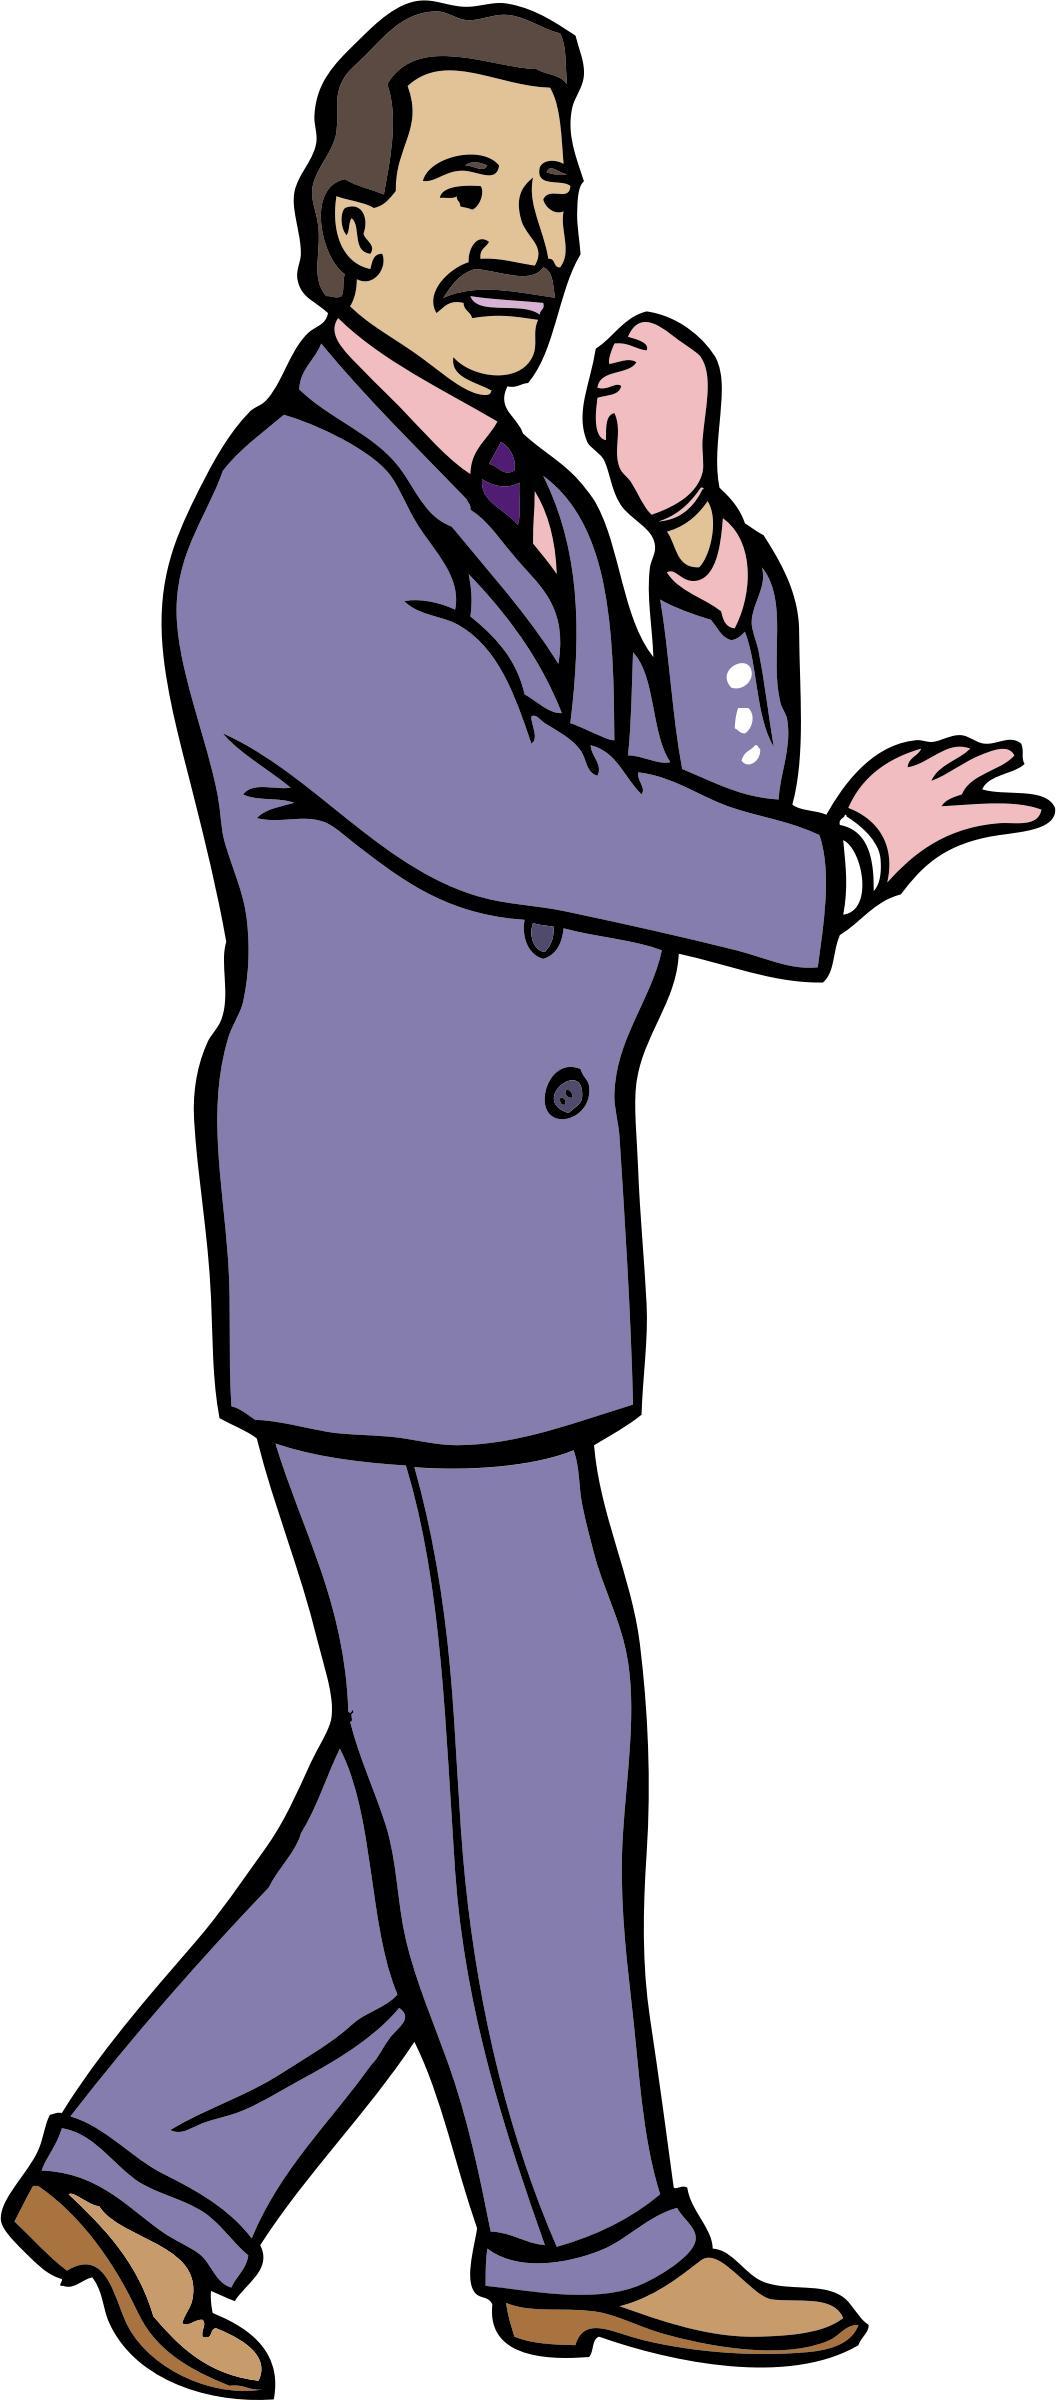 Karate guy in a fashionable purple suit w/ gloves png transparent